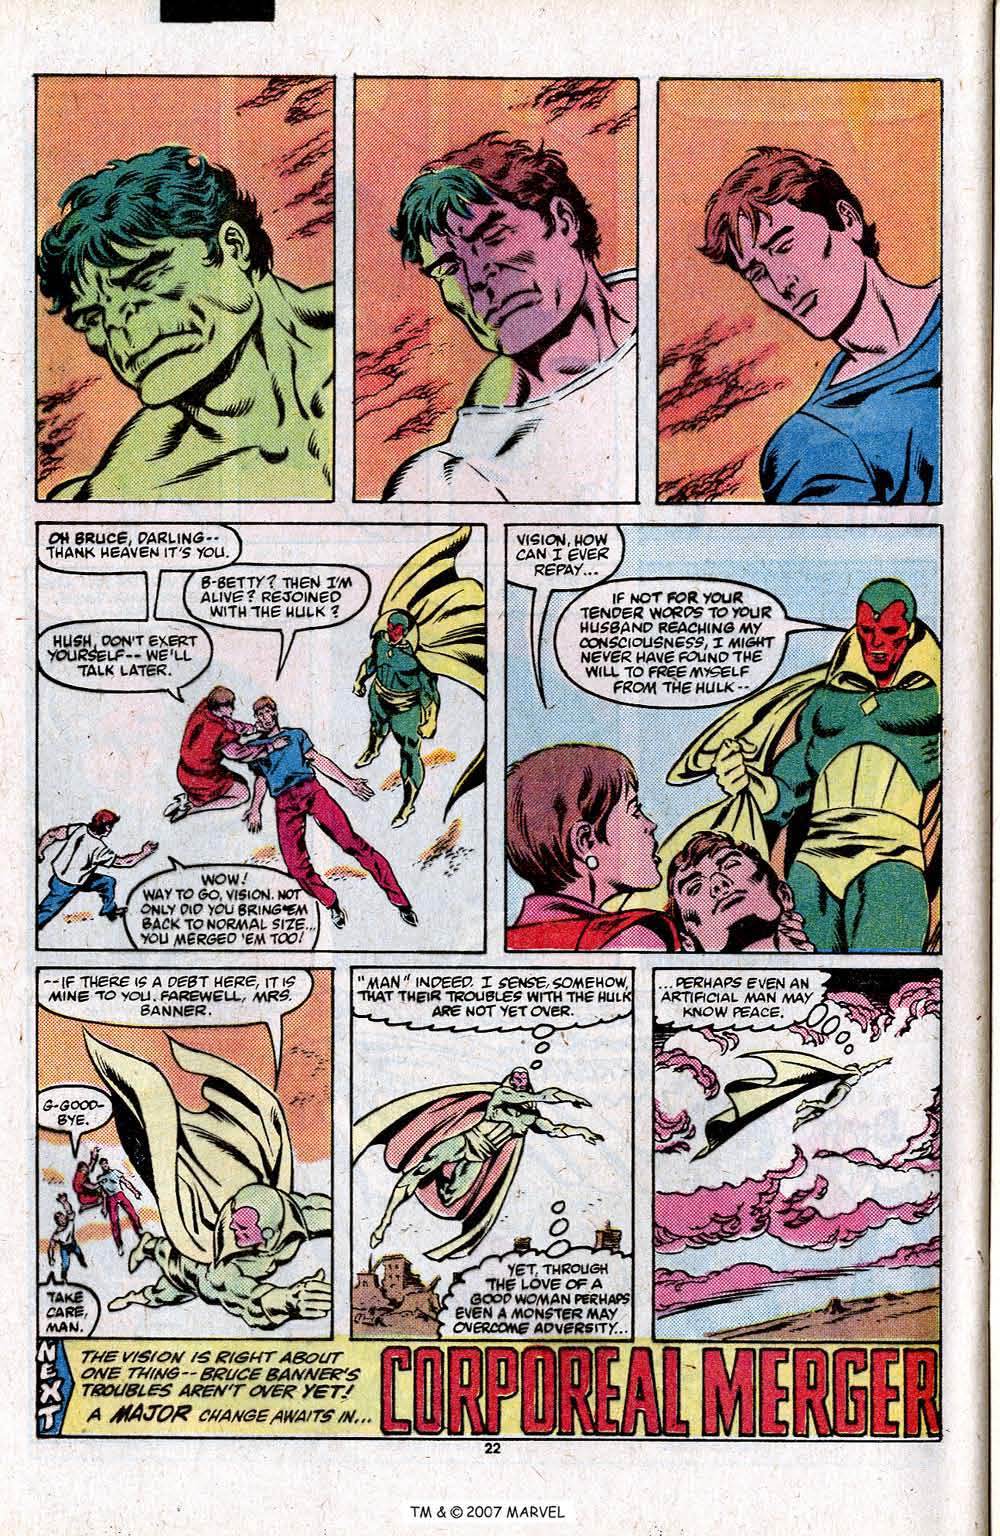 end result being vision regains control over his mind and phases through hulk koing him.